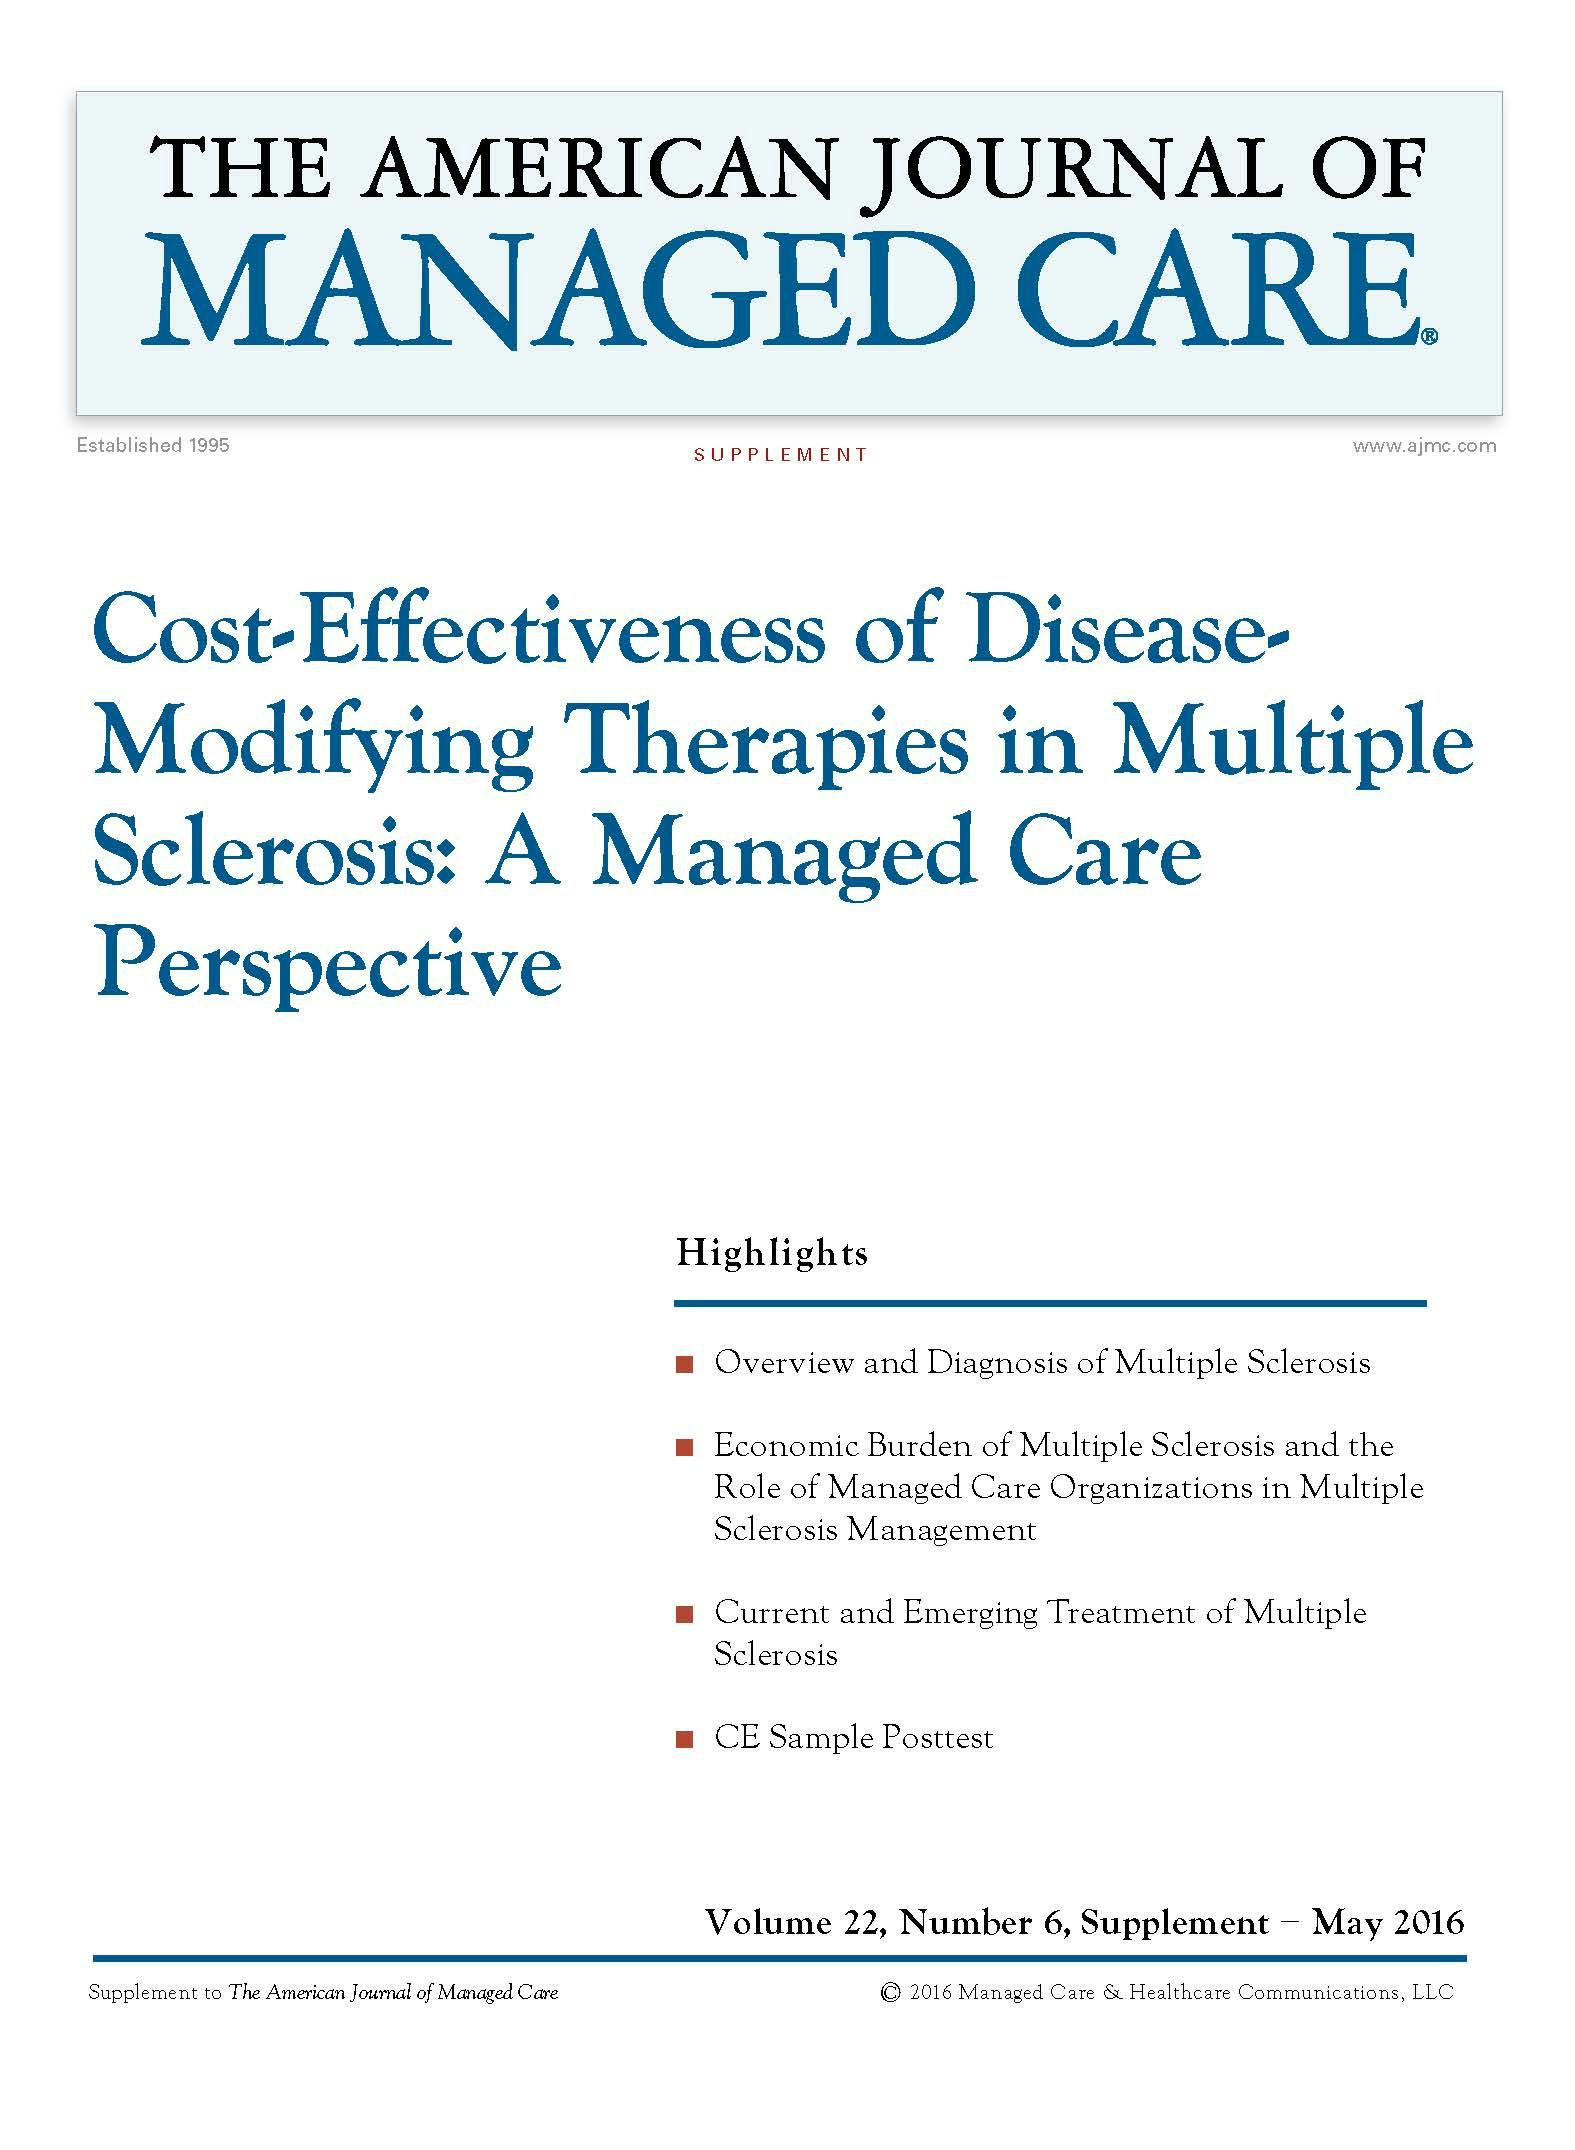 Cost-Effectiveness of Disease- Modifying Therapies in Multiple Sclerosis: A Managed Care Perspective